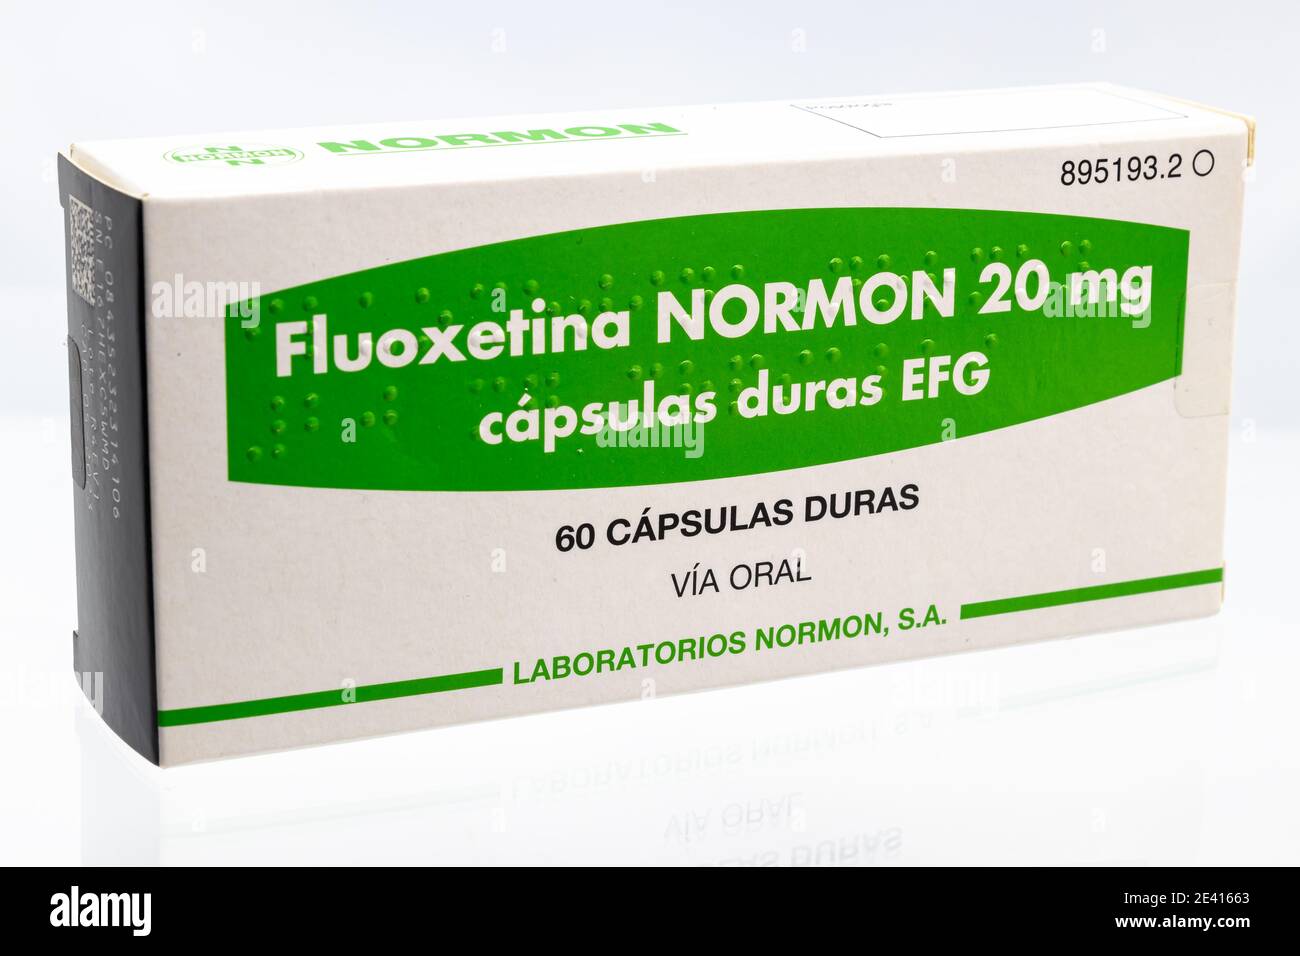 Huelva, Spain - January 21, 2021: Spanish Box of Fluoxetine NORMON 20mg. Fluoxetine is a type of antidepressant known as an SSRI (selective serotonin Stock Photo